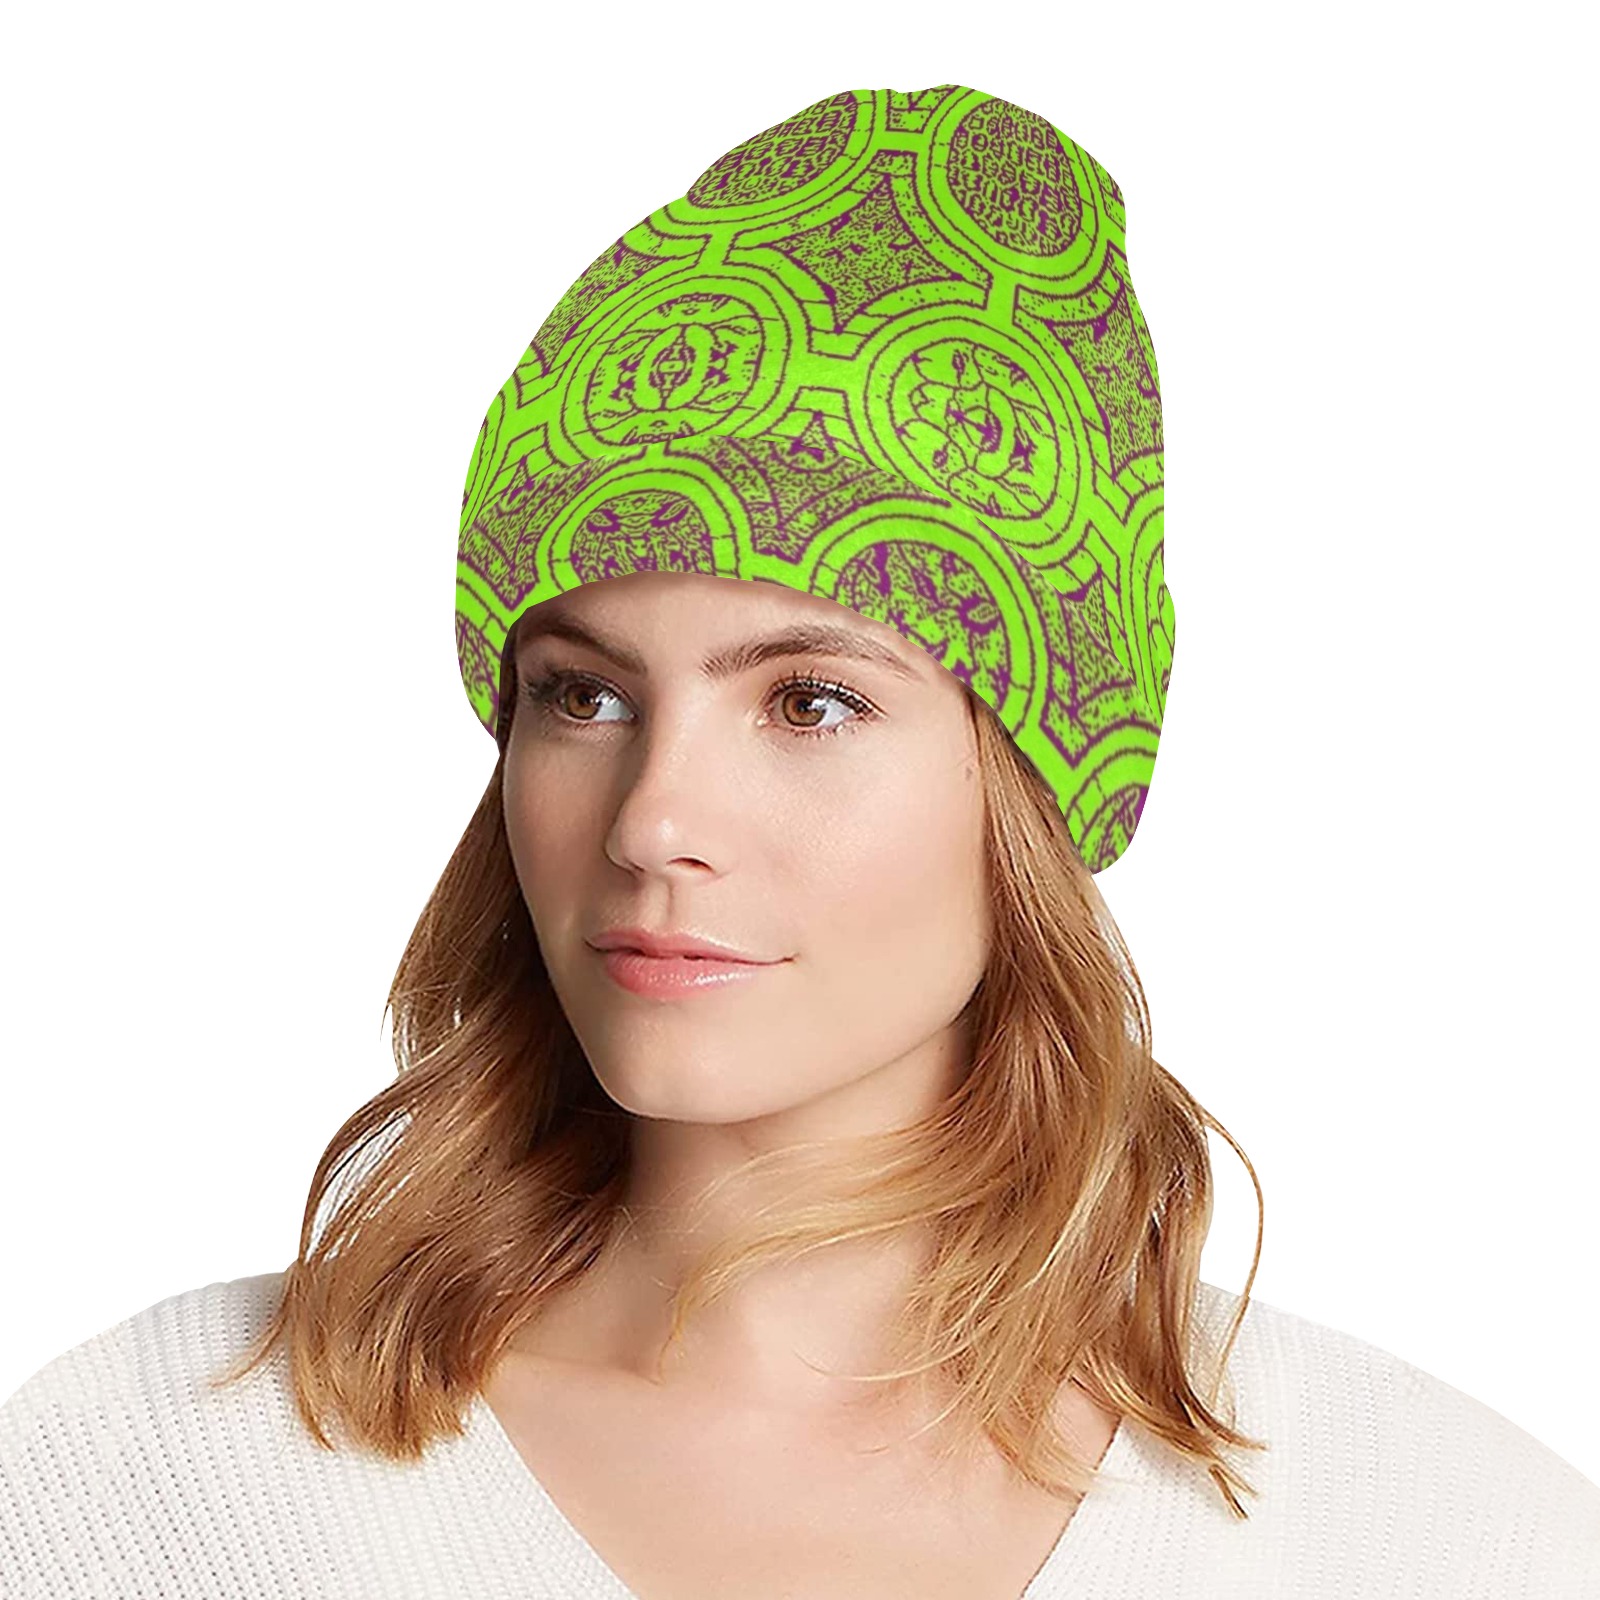 AFRICAN PRINT PATTERN 2 All Over Print Beanie for Adults